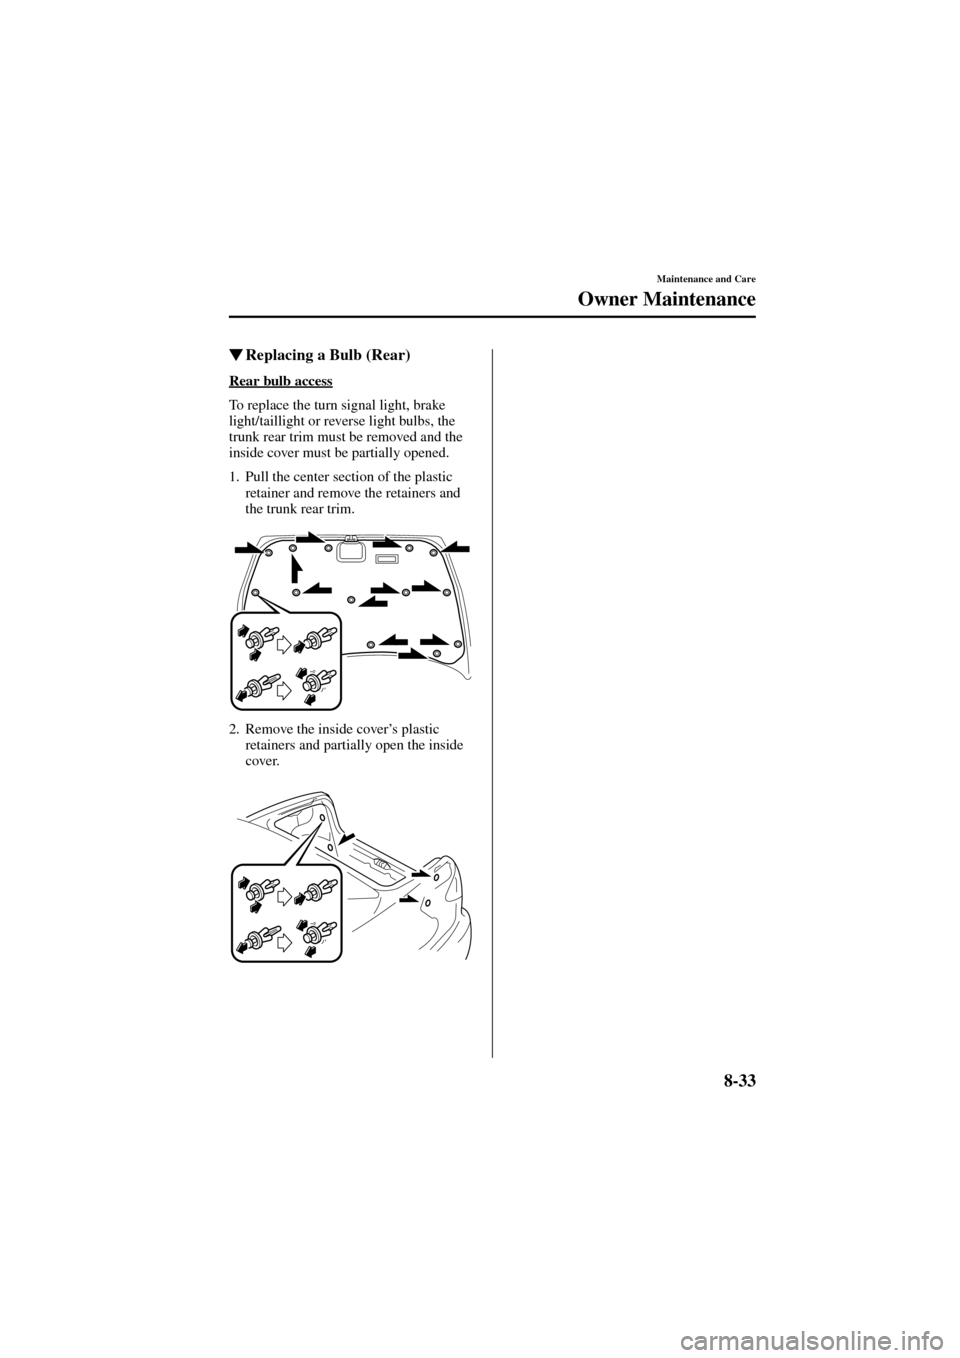 MAZDA MODEL 6 2004  Owners Manual (in English) 8-33
Maintenance and Care
Owner Maintenance
Form No. 8R29-EA-02I
Replacing a Bulb (Rear)
Rear bulb access
To replace the turn signal light, brake 
light/taillight or reverse light bulbs, the 
trunk r